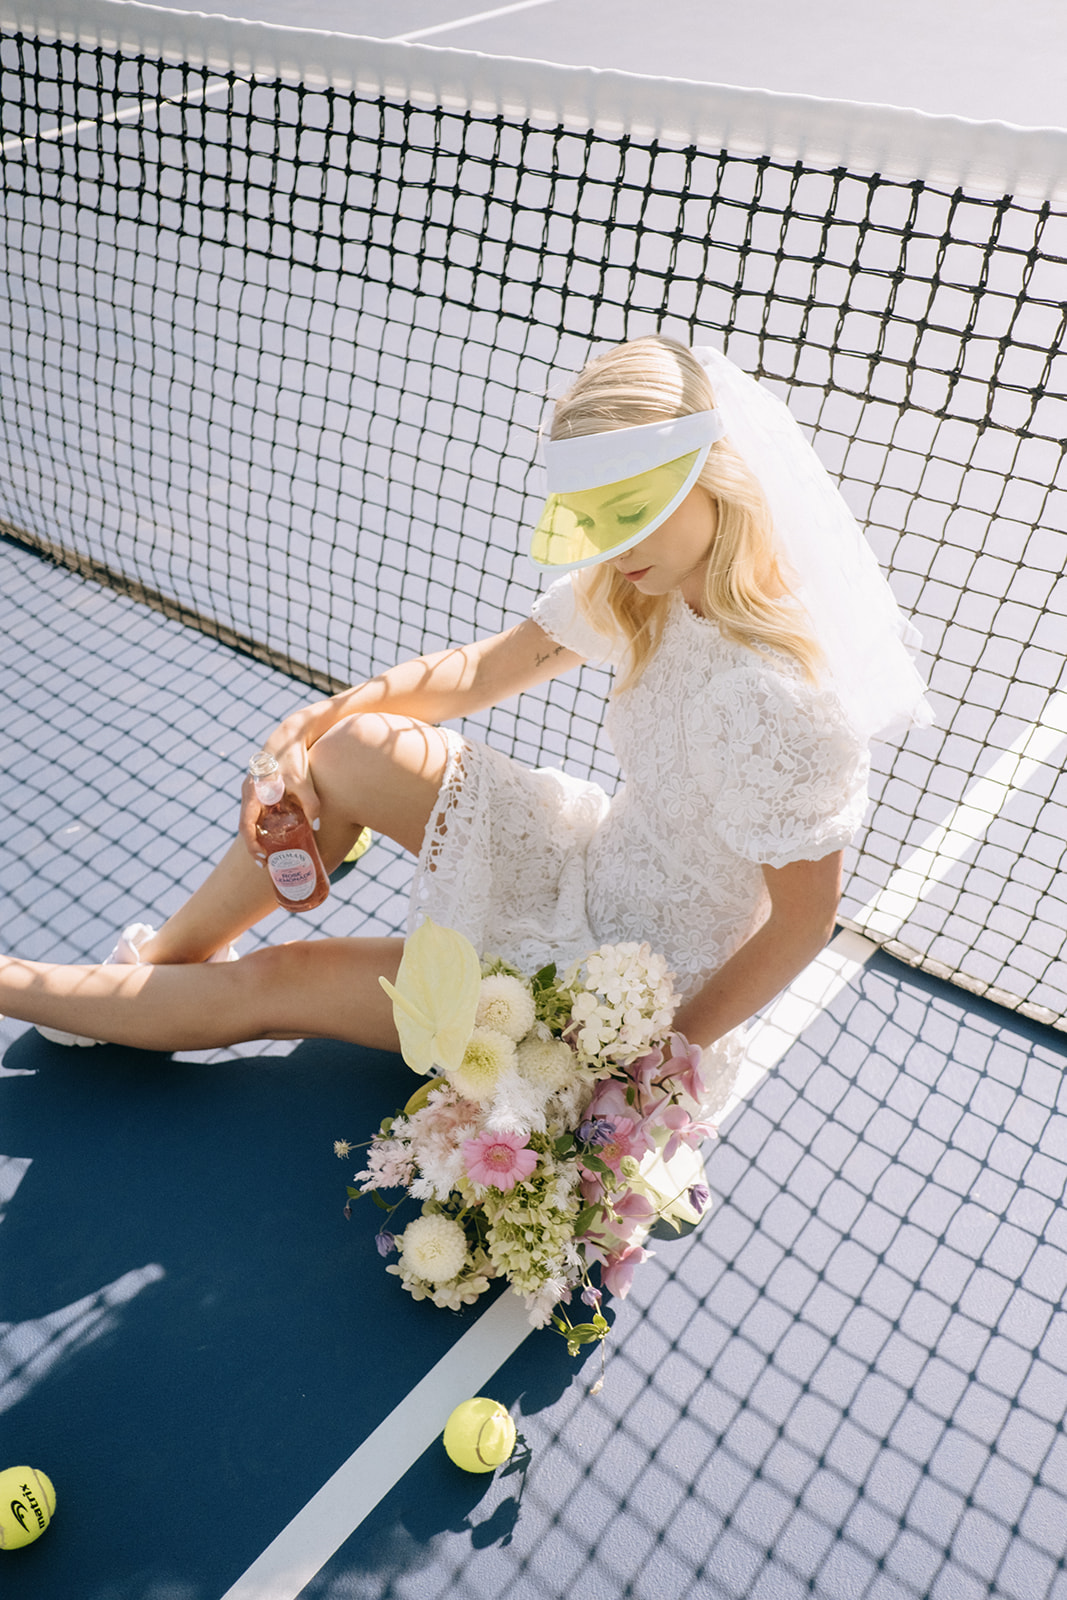 Short bridal veil and clear chartreuse tennis visor for a fashion -forward bride, bridal portrait leaning against tennis court net showcasing bouquet by Hen and Chicks in neons and pastel colour palette, short wedding dress ideas for casual elopement